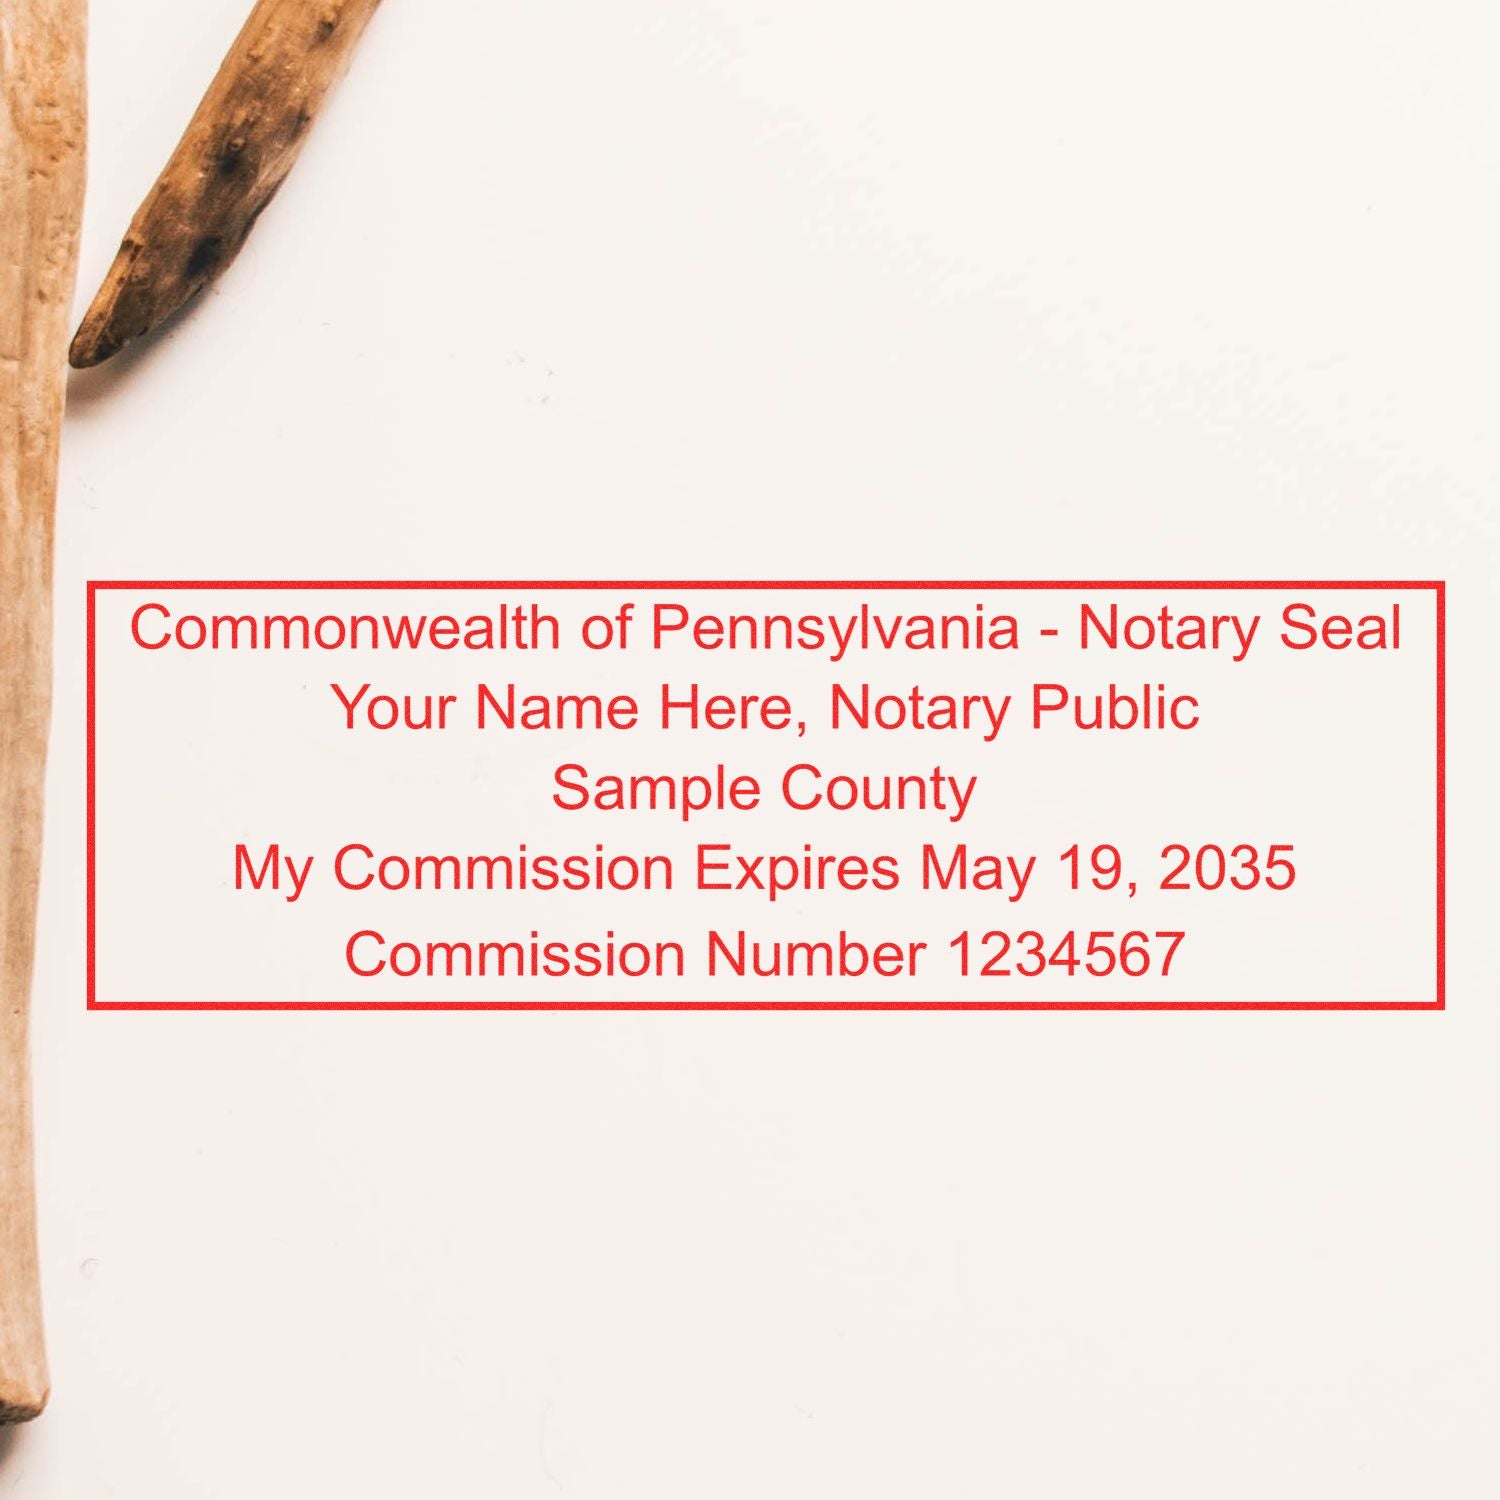 Revolutionize Your Notarial Practice: Partner with a Top Notary Stamp Vendor Feature Image